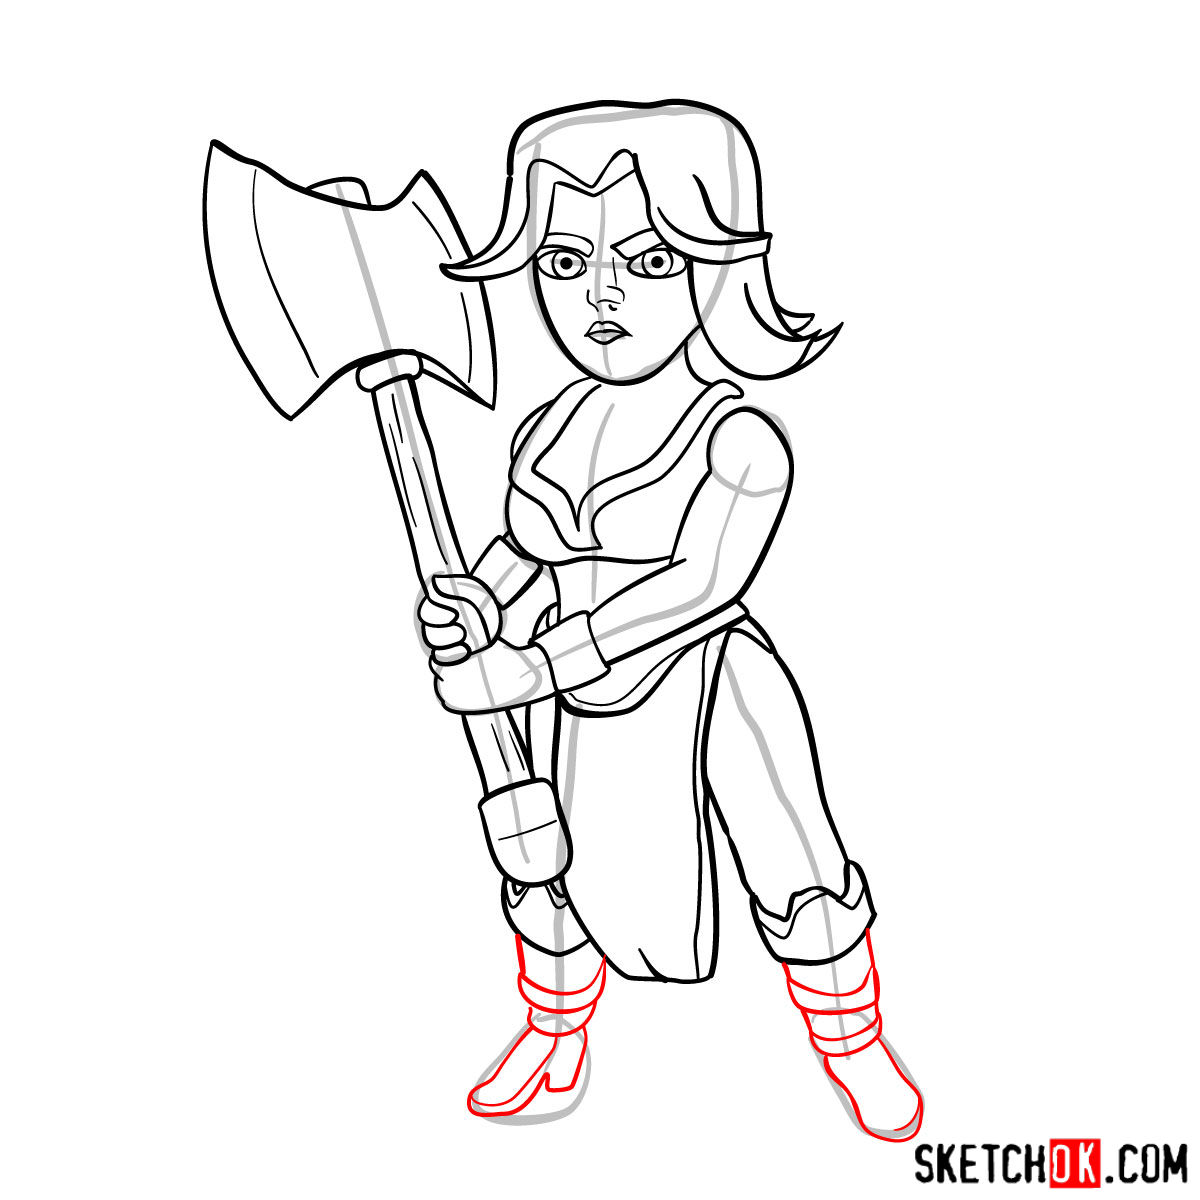 How to draw Valkyrie from Clash of Clans - step 11